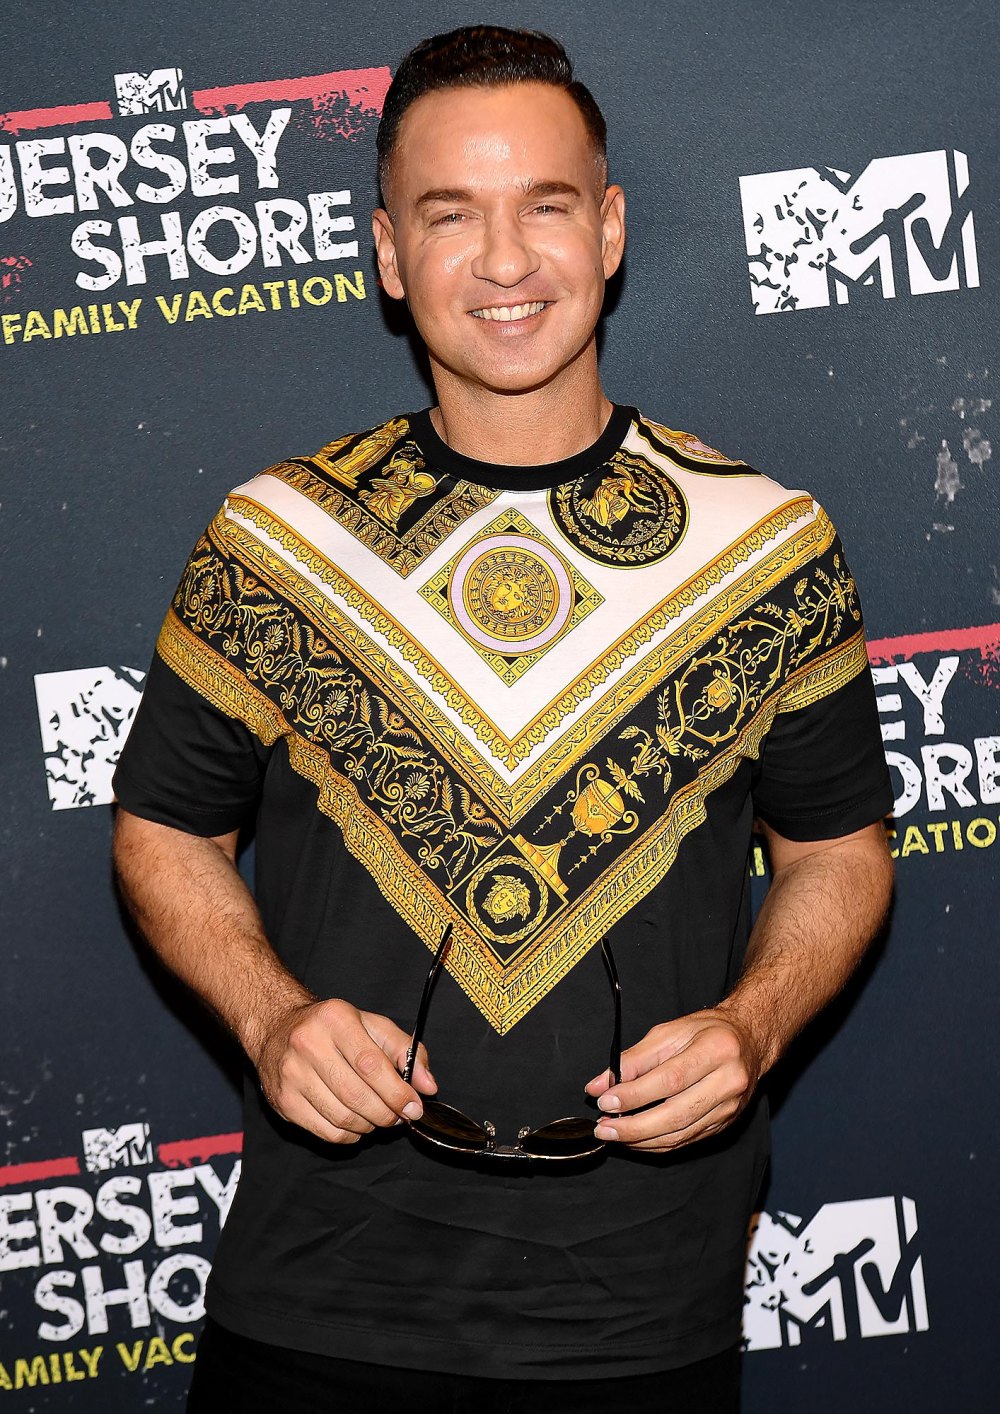 Mike 'The Situation' Sorrentino reveals when his kids can watch 'Jersey Shore'